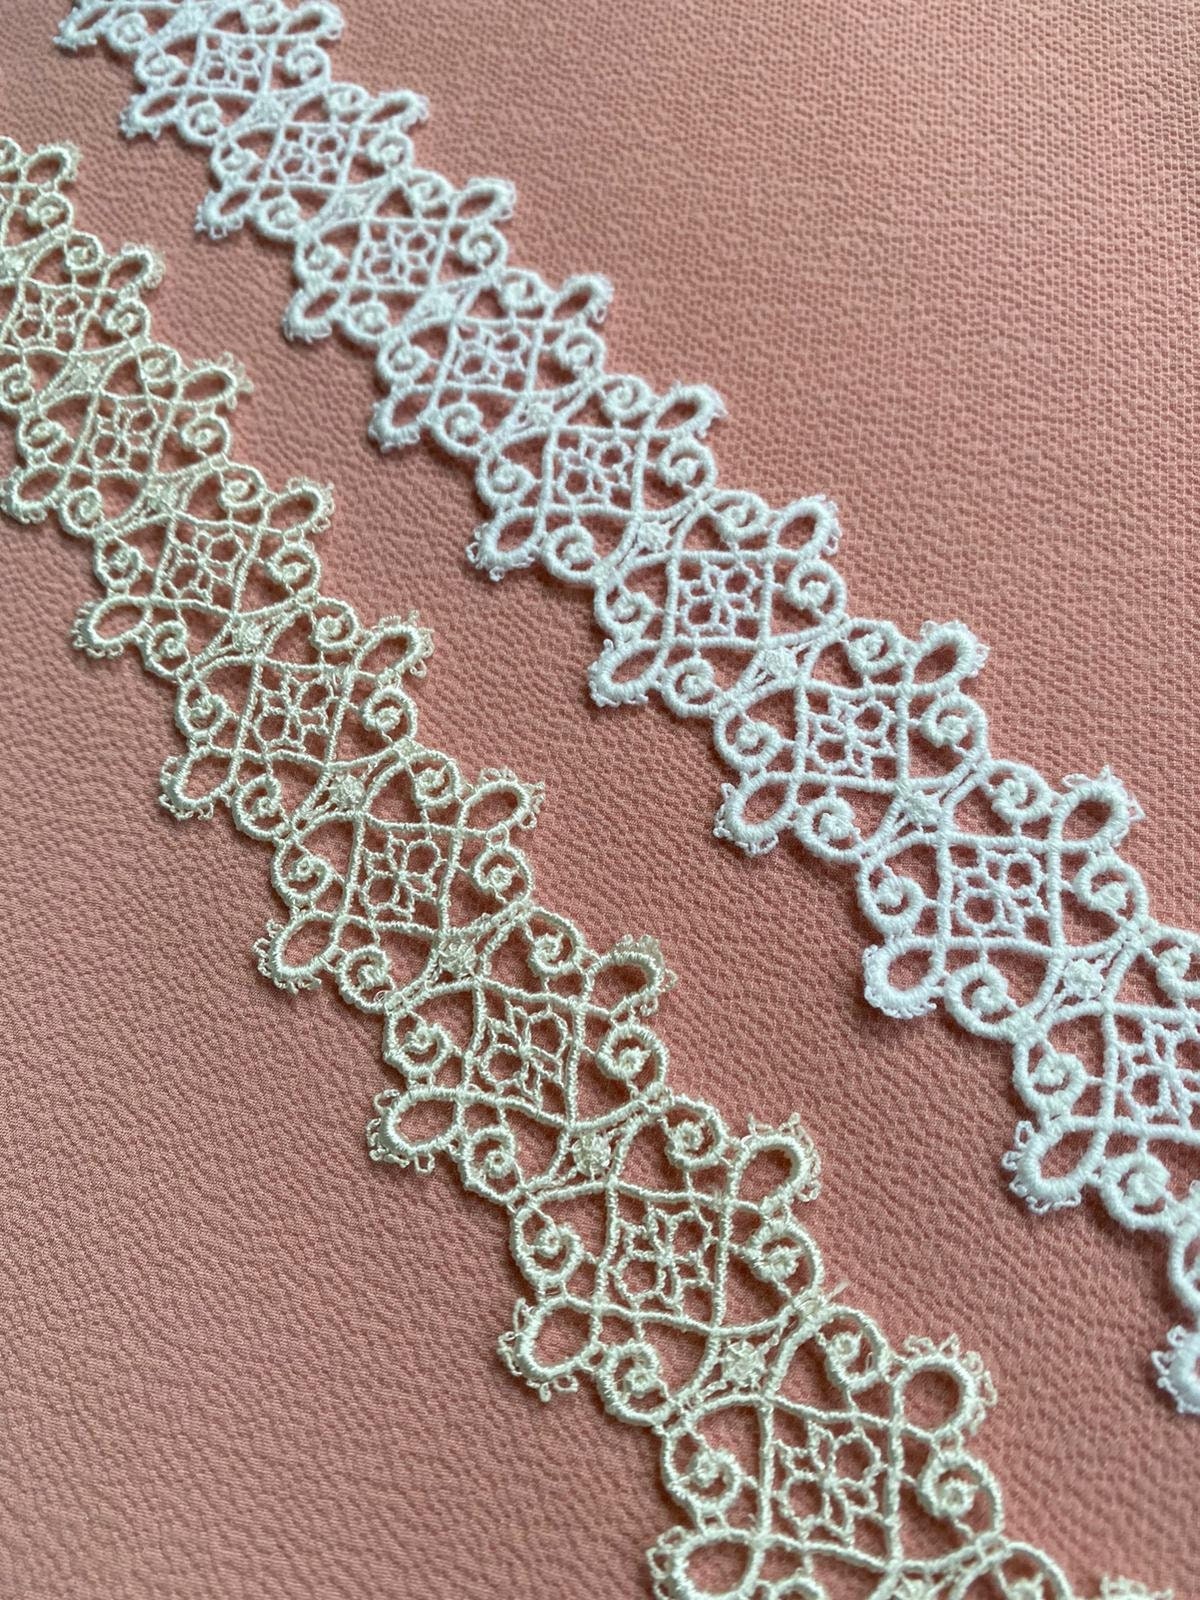 Floral Scalloped Edge Polyester Venice Lace Trim Beige 1 1 1/4 1 5/16 1 7/16 Wide White Chemical Lace Guipure Lace Ivory